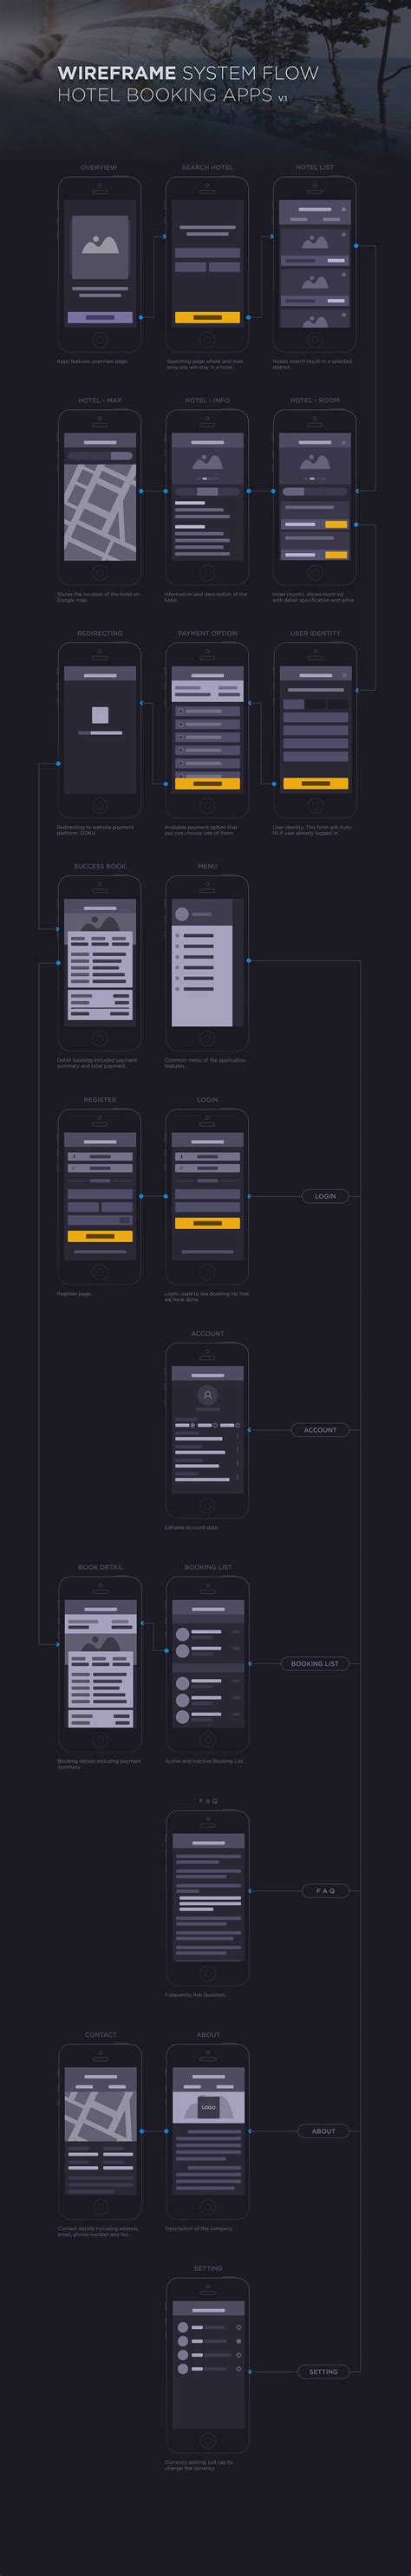 Create a hotel booking app! Hotel Booking Apps Wireframe Design on Behance